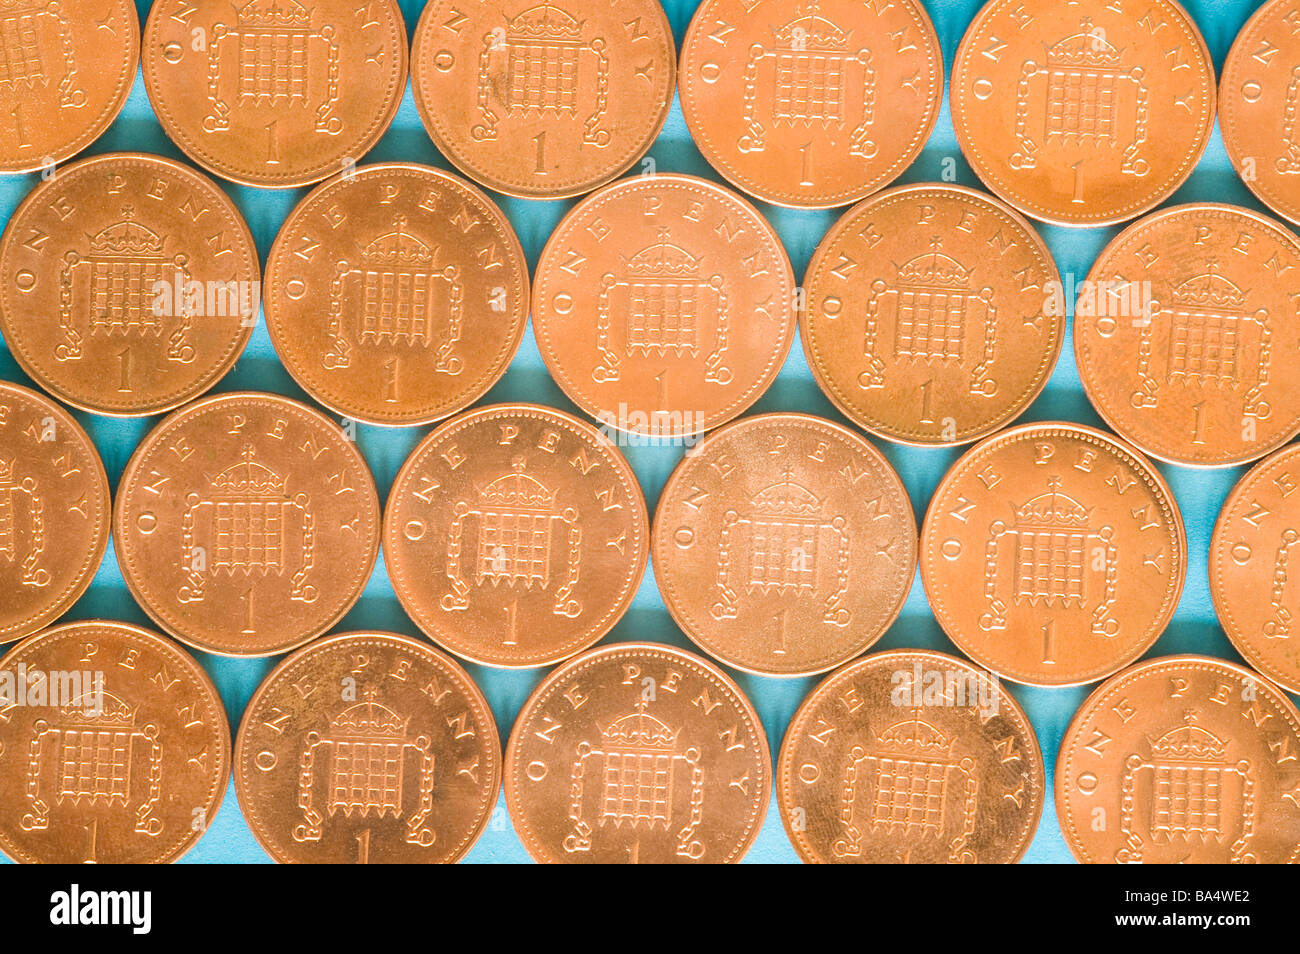 Pattern of one pence coins on a light blue background Stock Photo